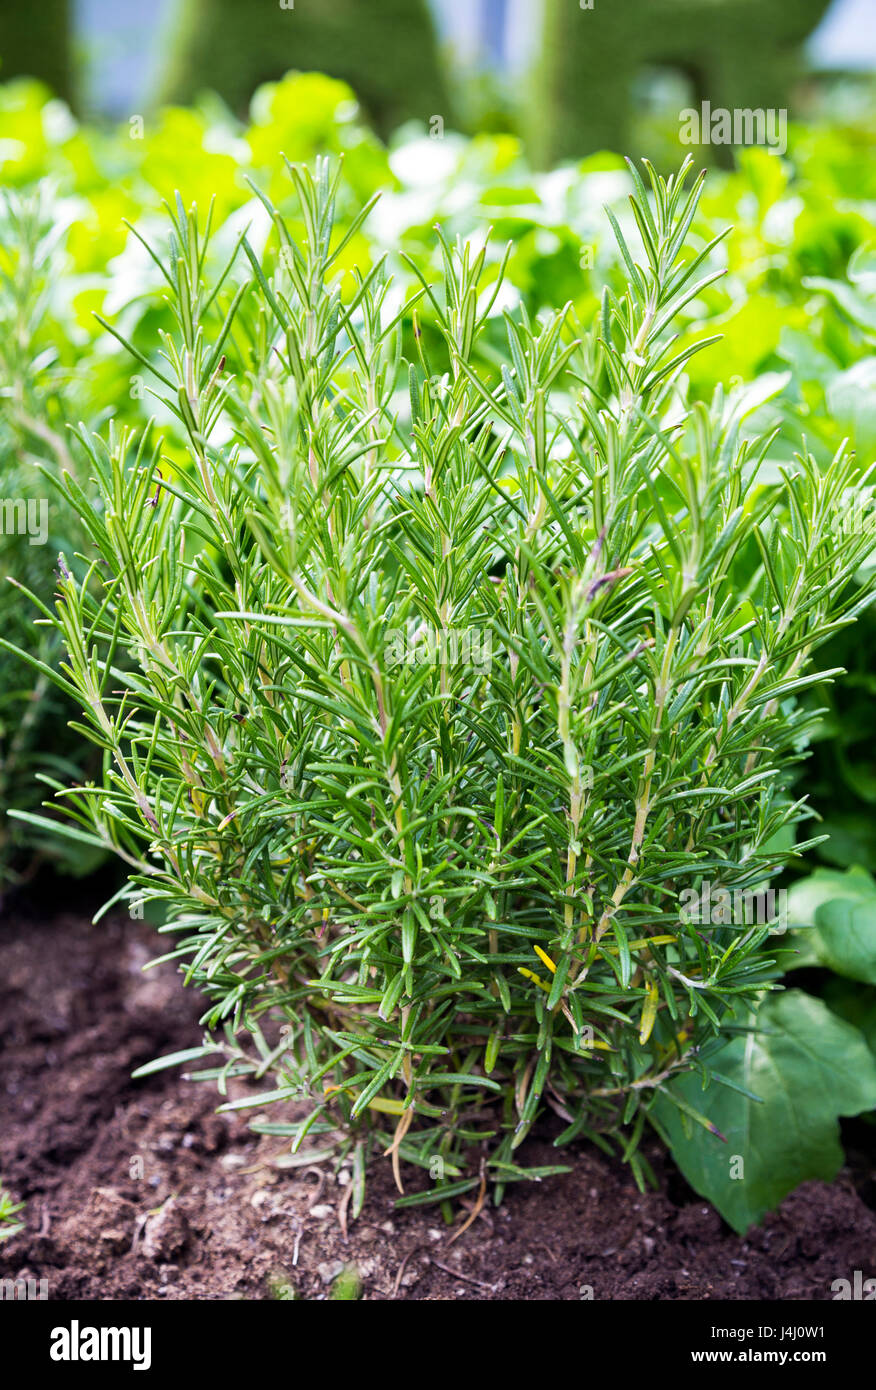 Rosemary (Rosmarinus officinalis) plant growing in a garden Stock Photo